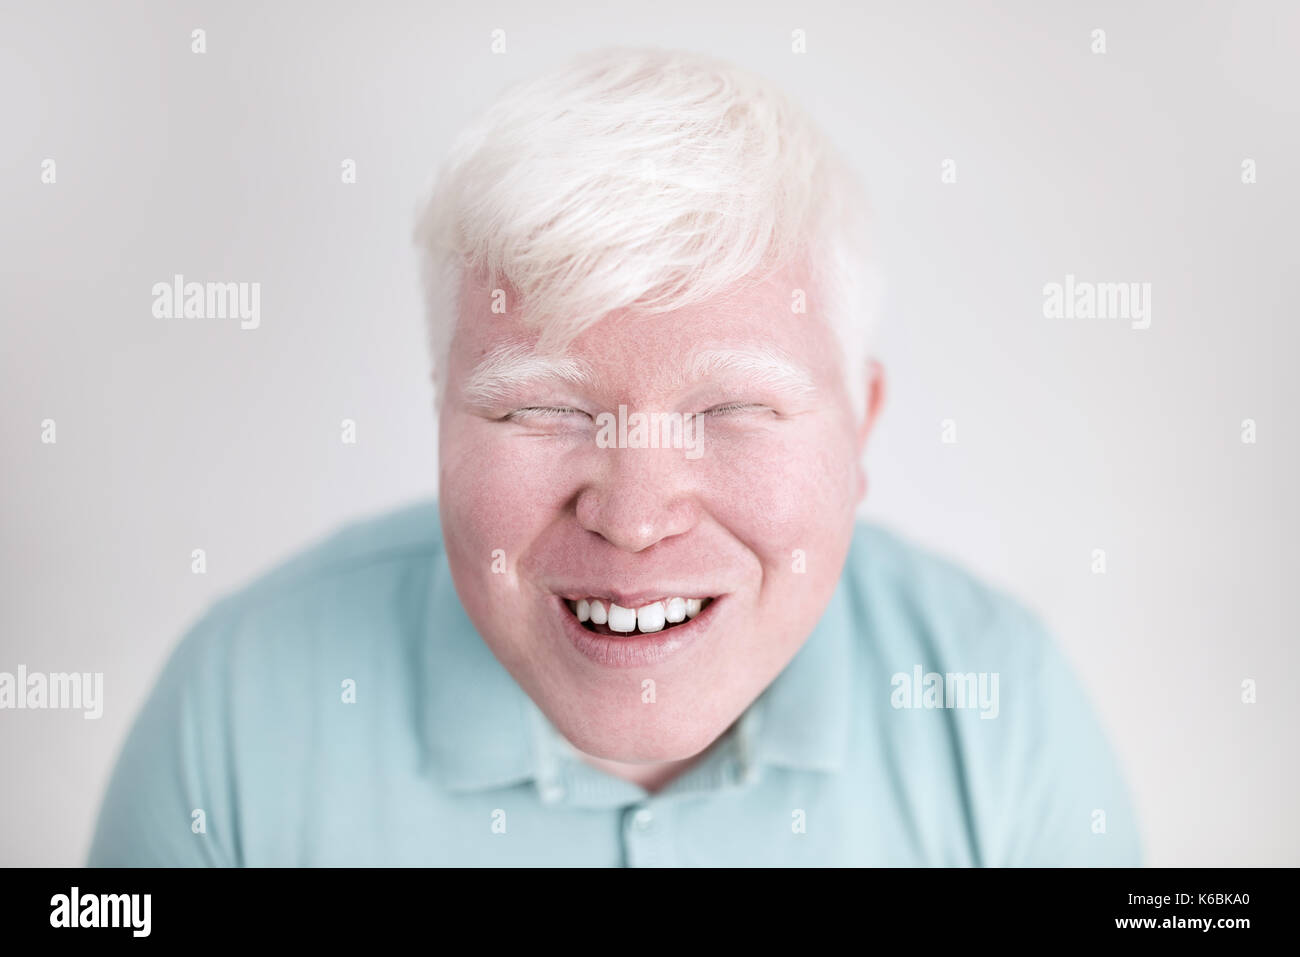 Albino young man portrait. Smiling man isolated at white background. Albinism, pale skin. Stock Photo